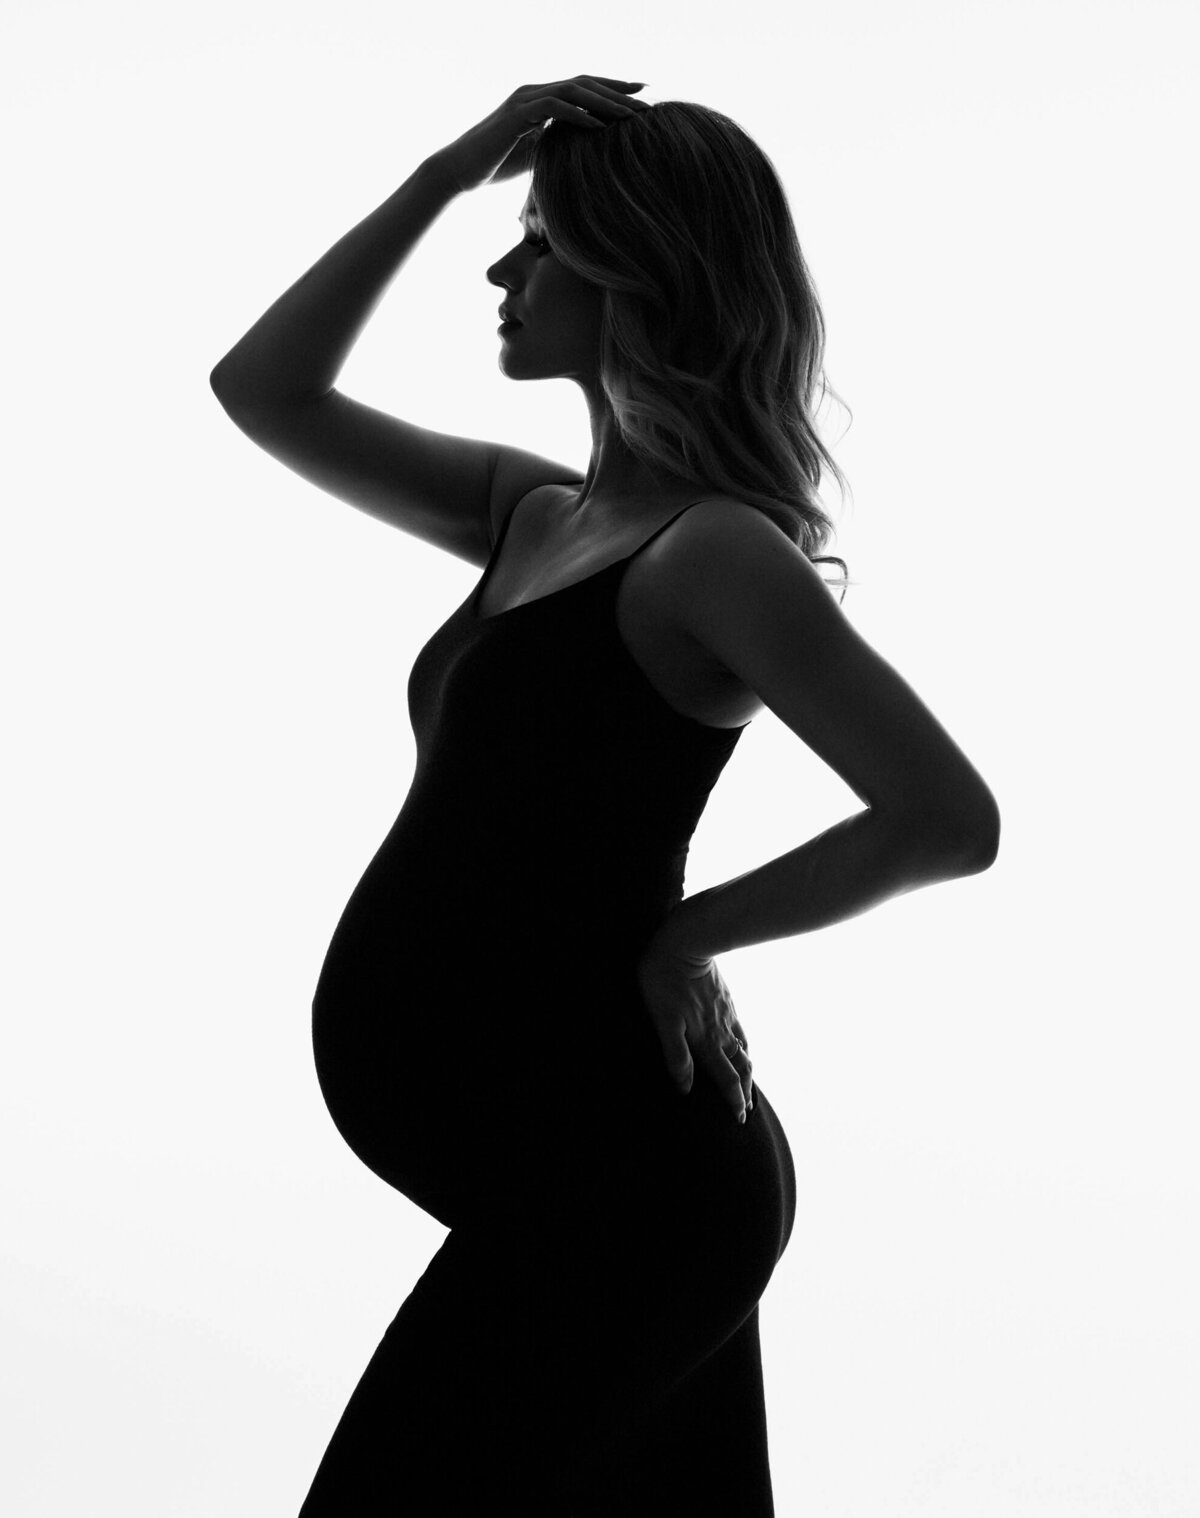 Artistic Lighting for Maternity Photography Course by Lola Melani-1-3